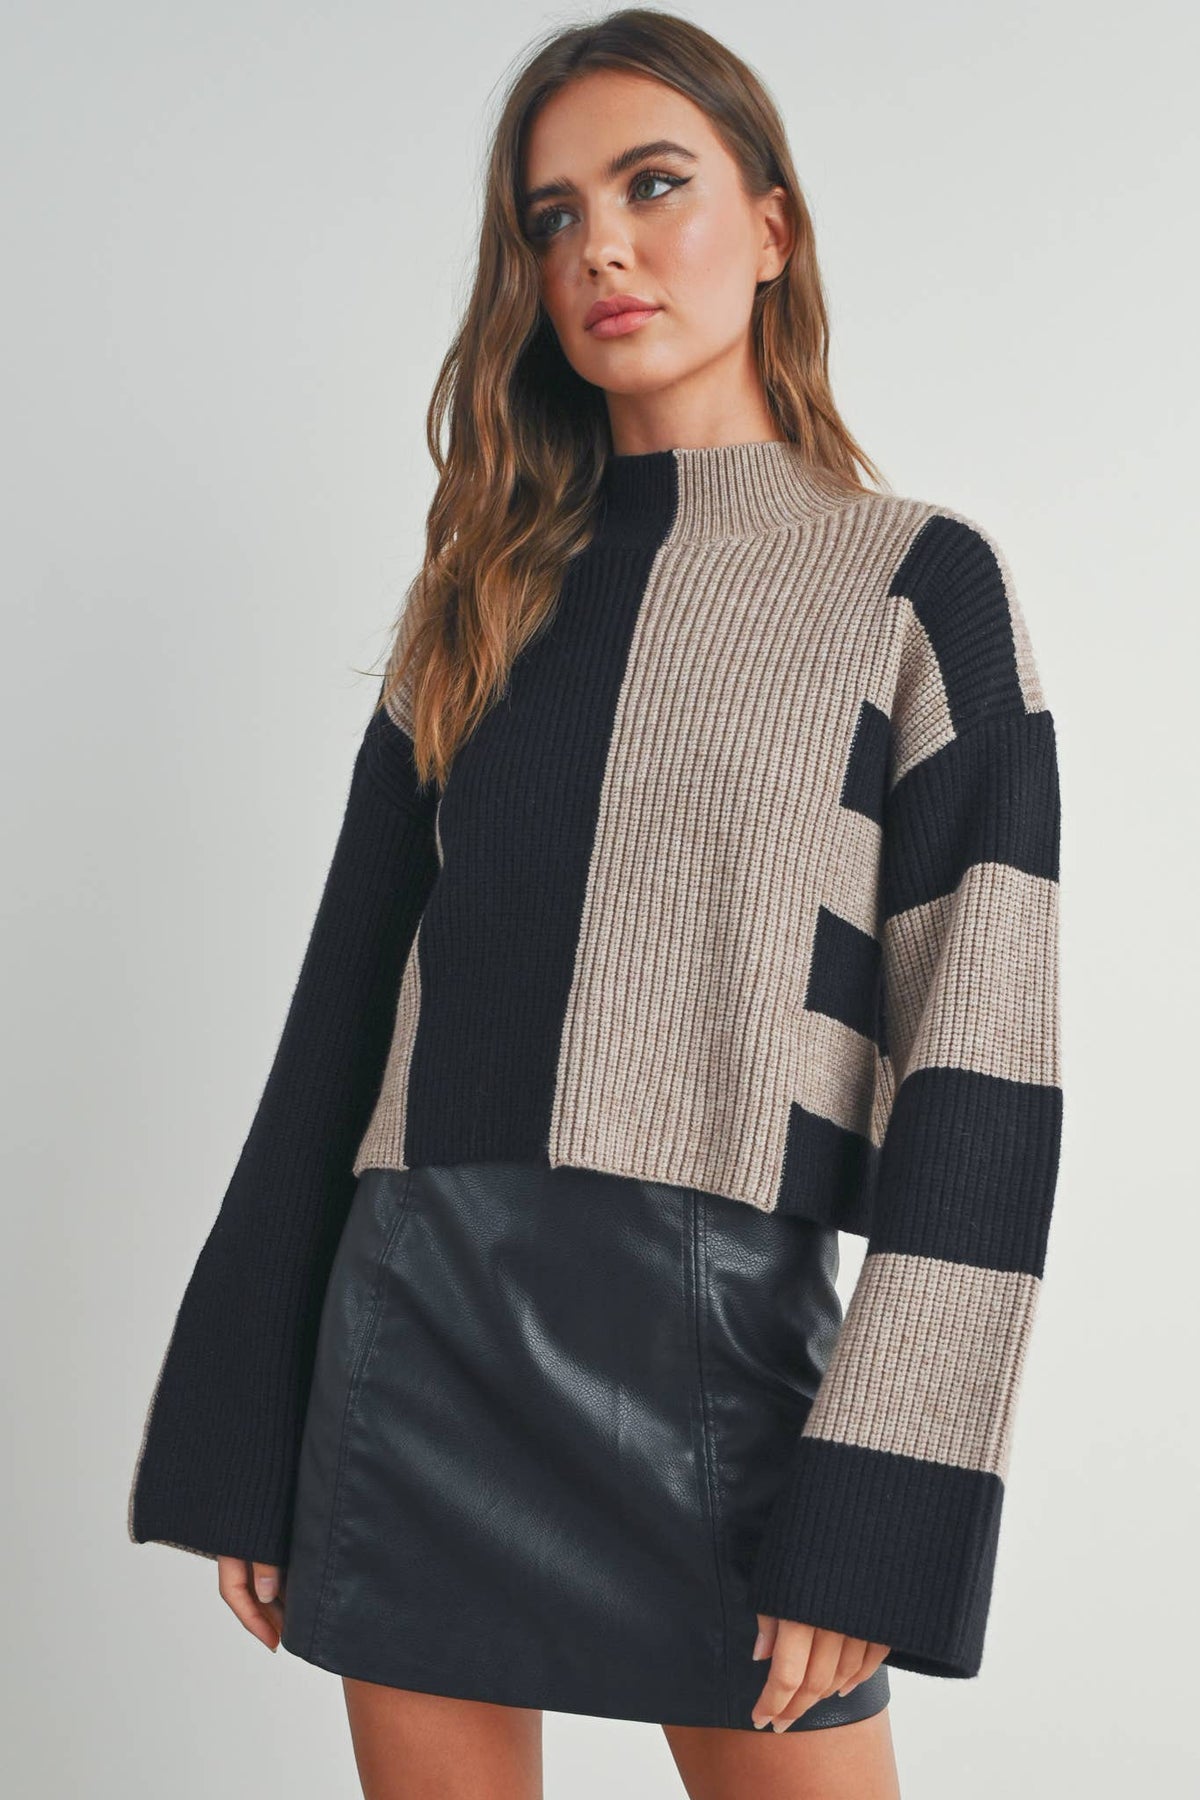 ALL YOURS COLOR BLOCK MOCK SWEATER-BLACK/OAT - UNCOMMON REIGN